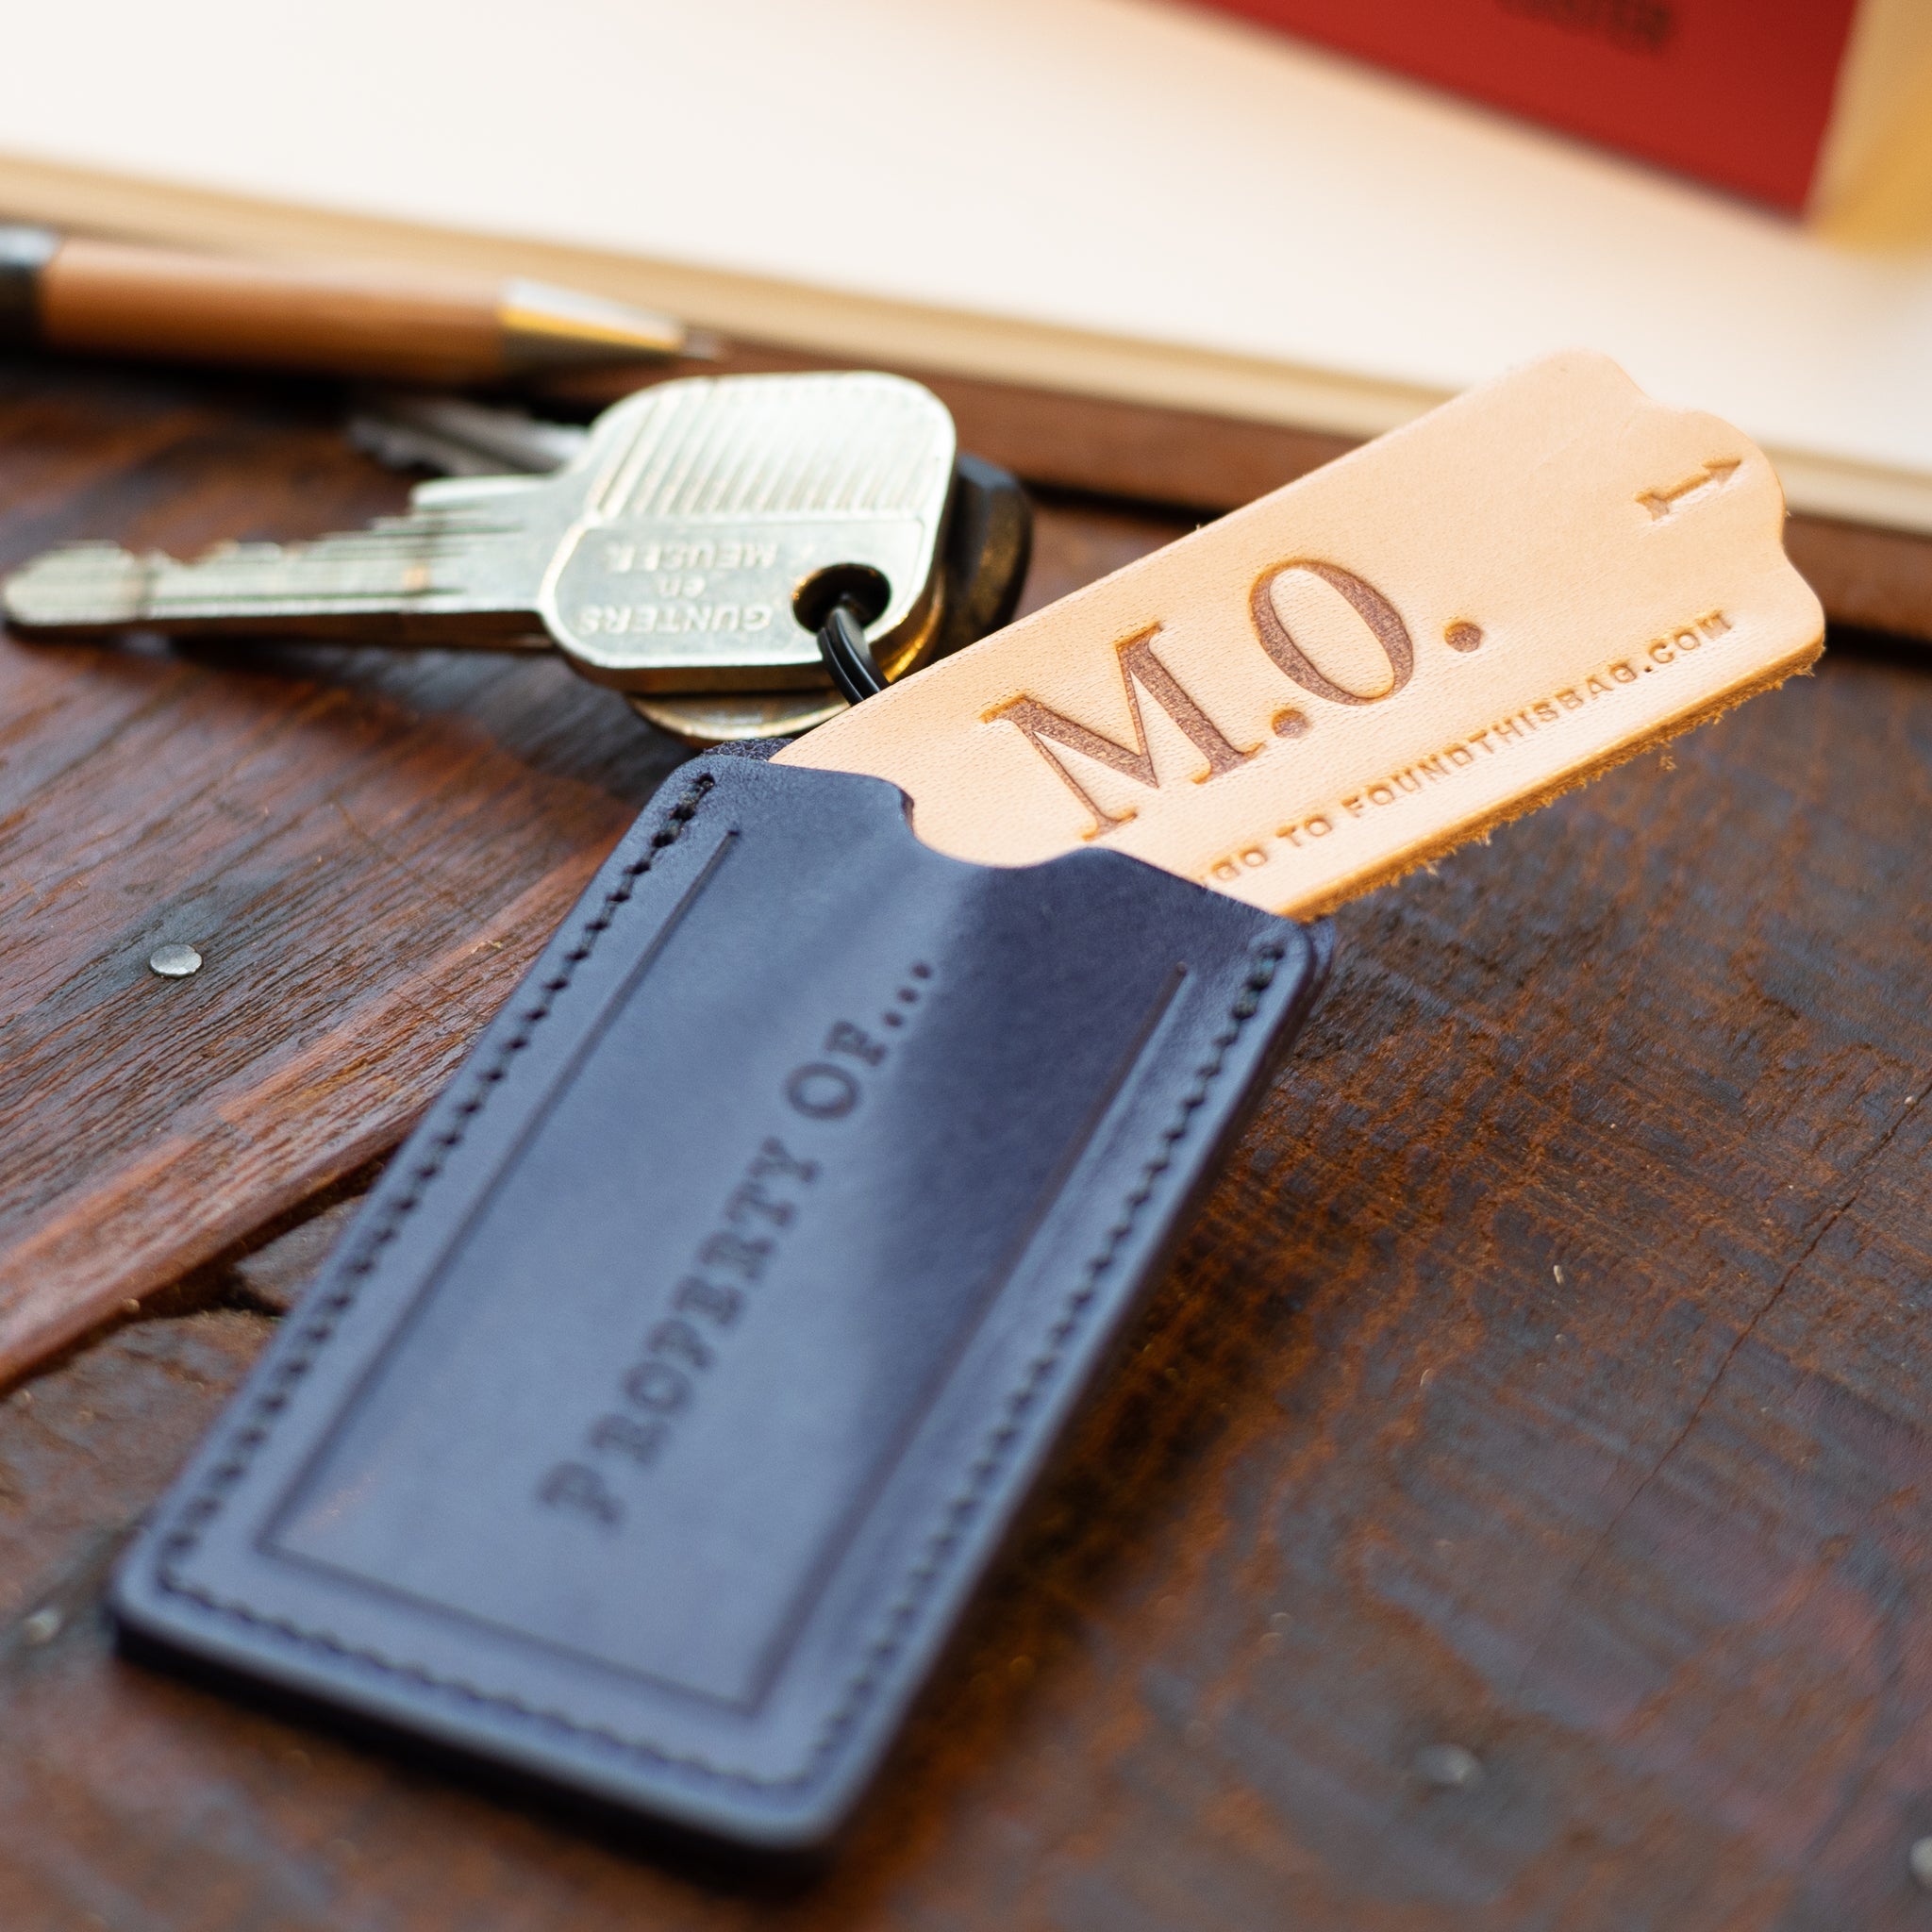 Personalised Foiled Leather Luggage Tag By NV London Calcutta   Personalized leather luggage tags, Leather luggage, Luggage tags